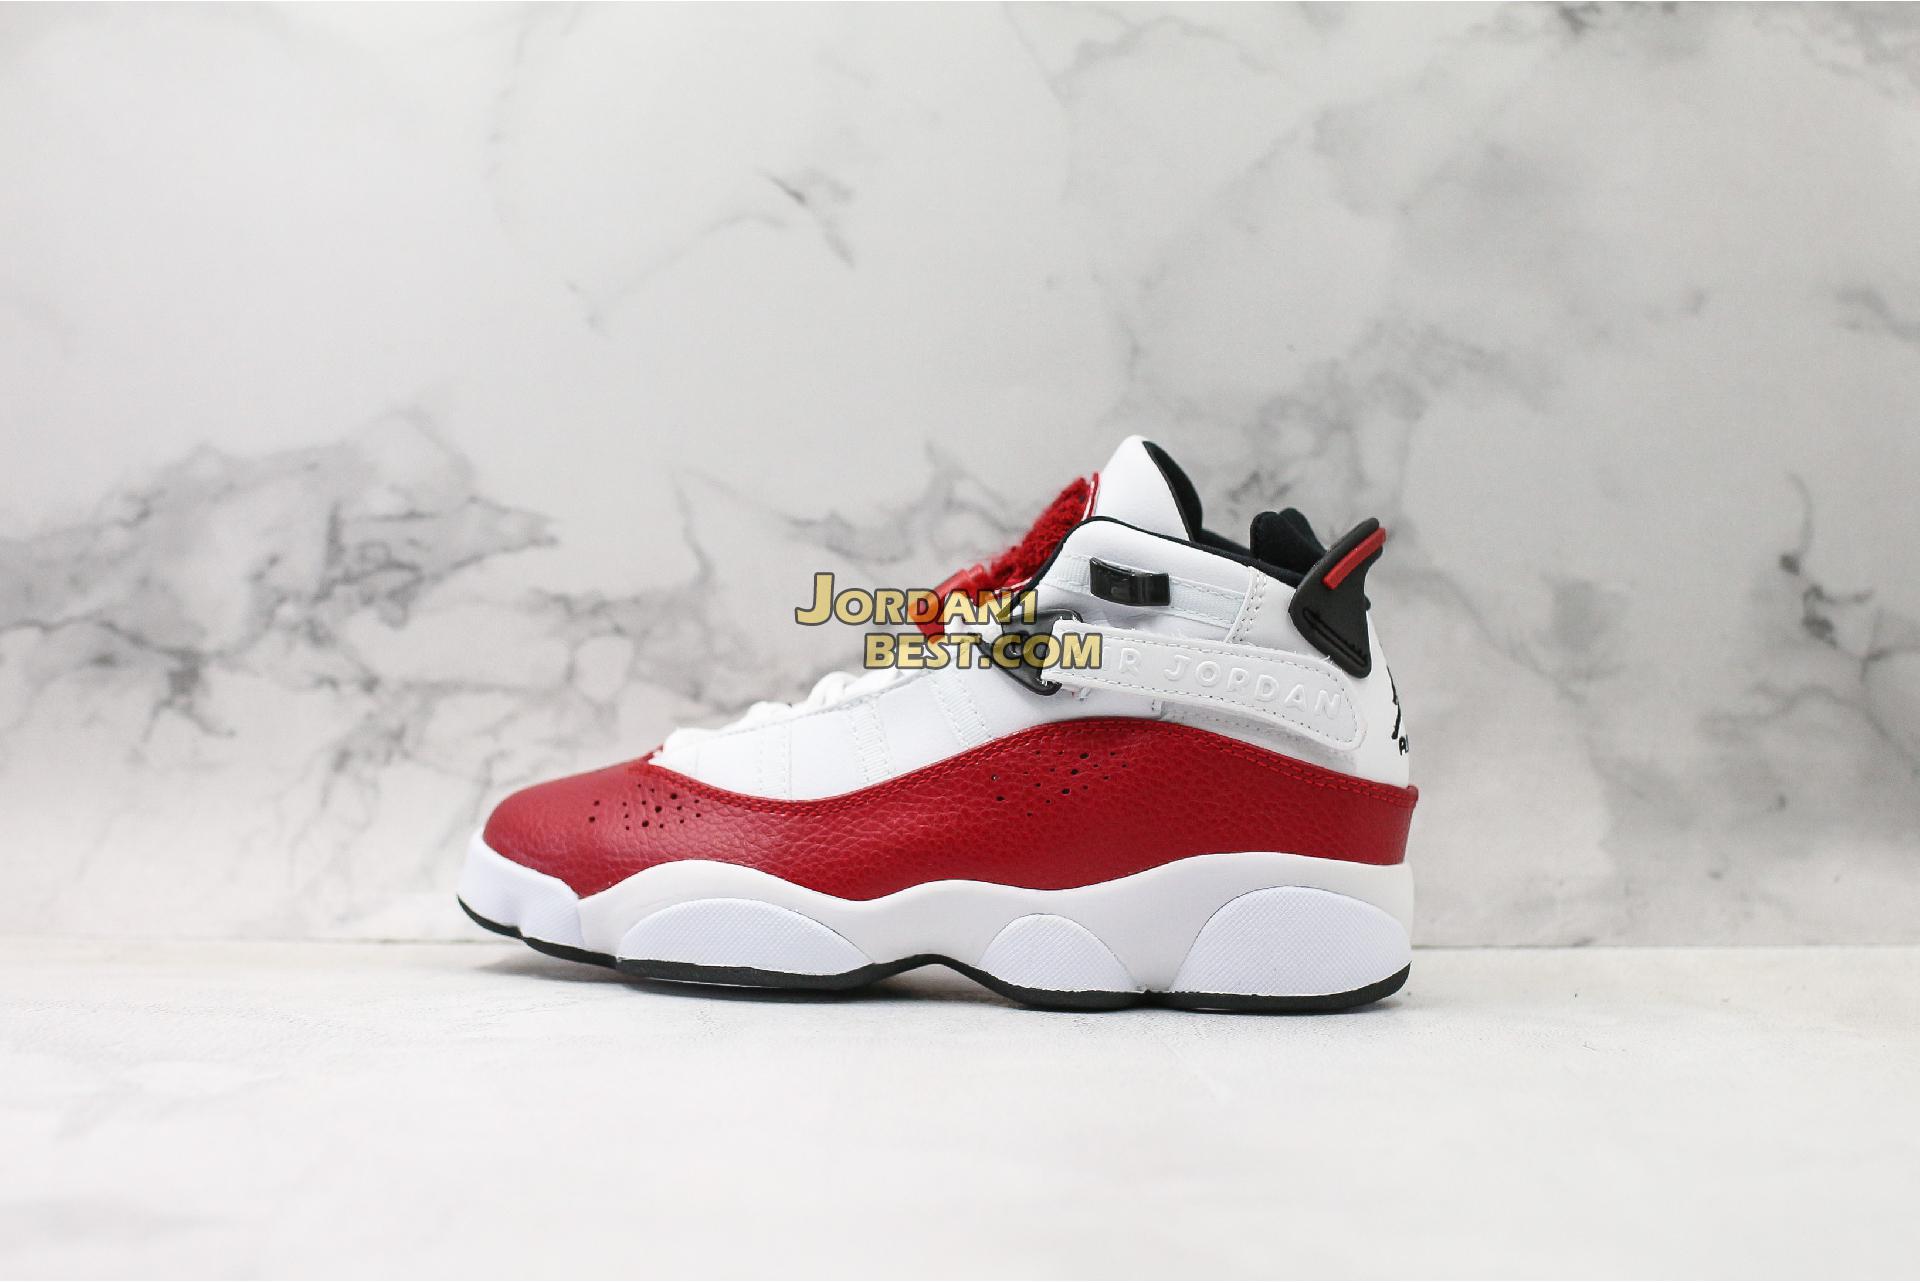 best replicas Air Jordan 6 Rings GS "White Red" 323419-120 Mens Womens white/red Shoes